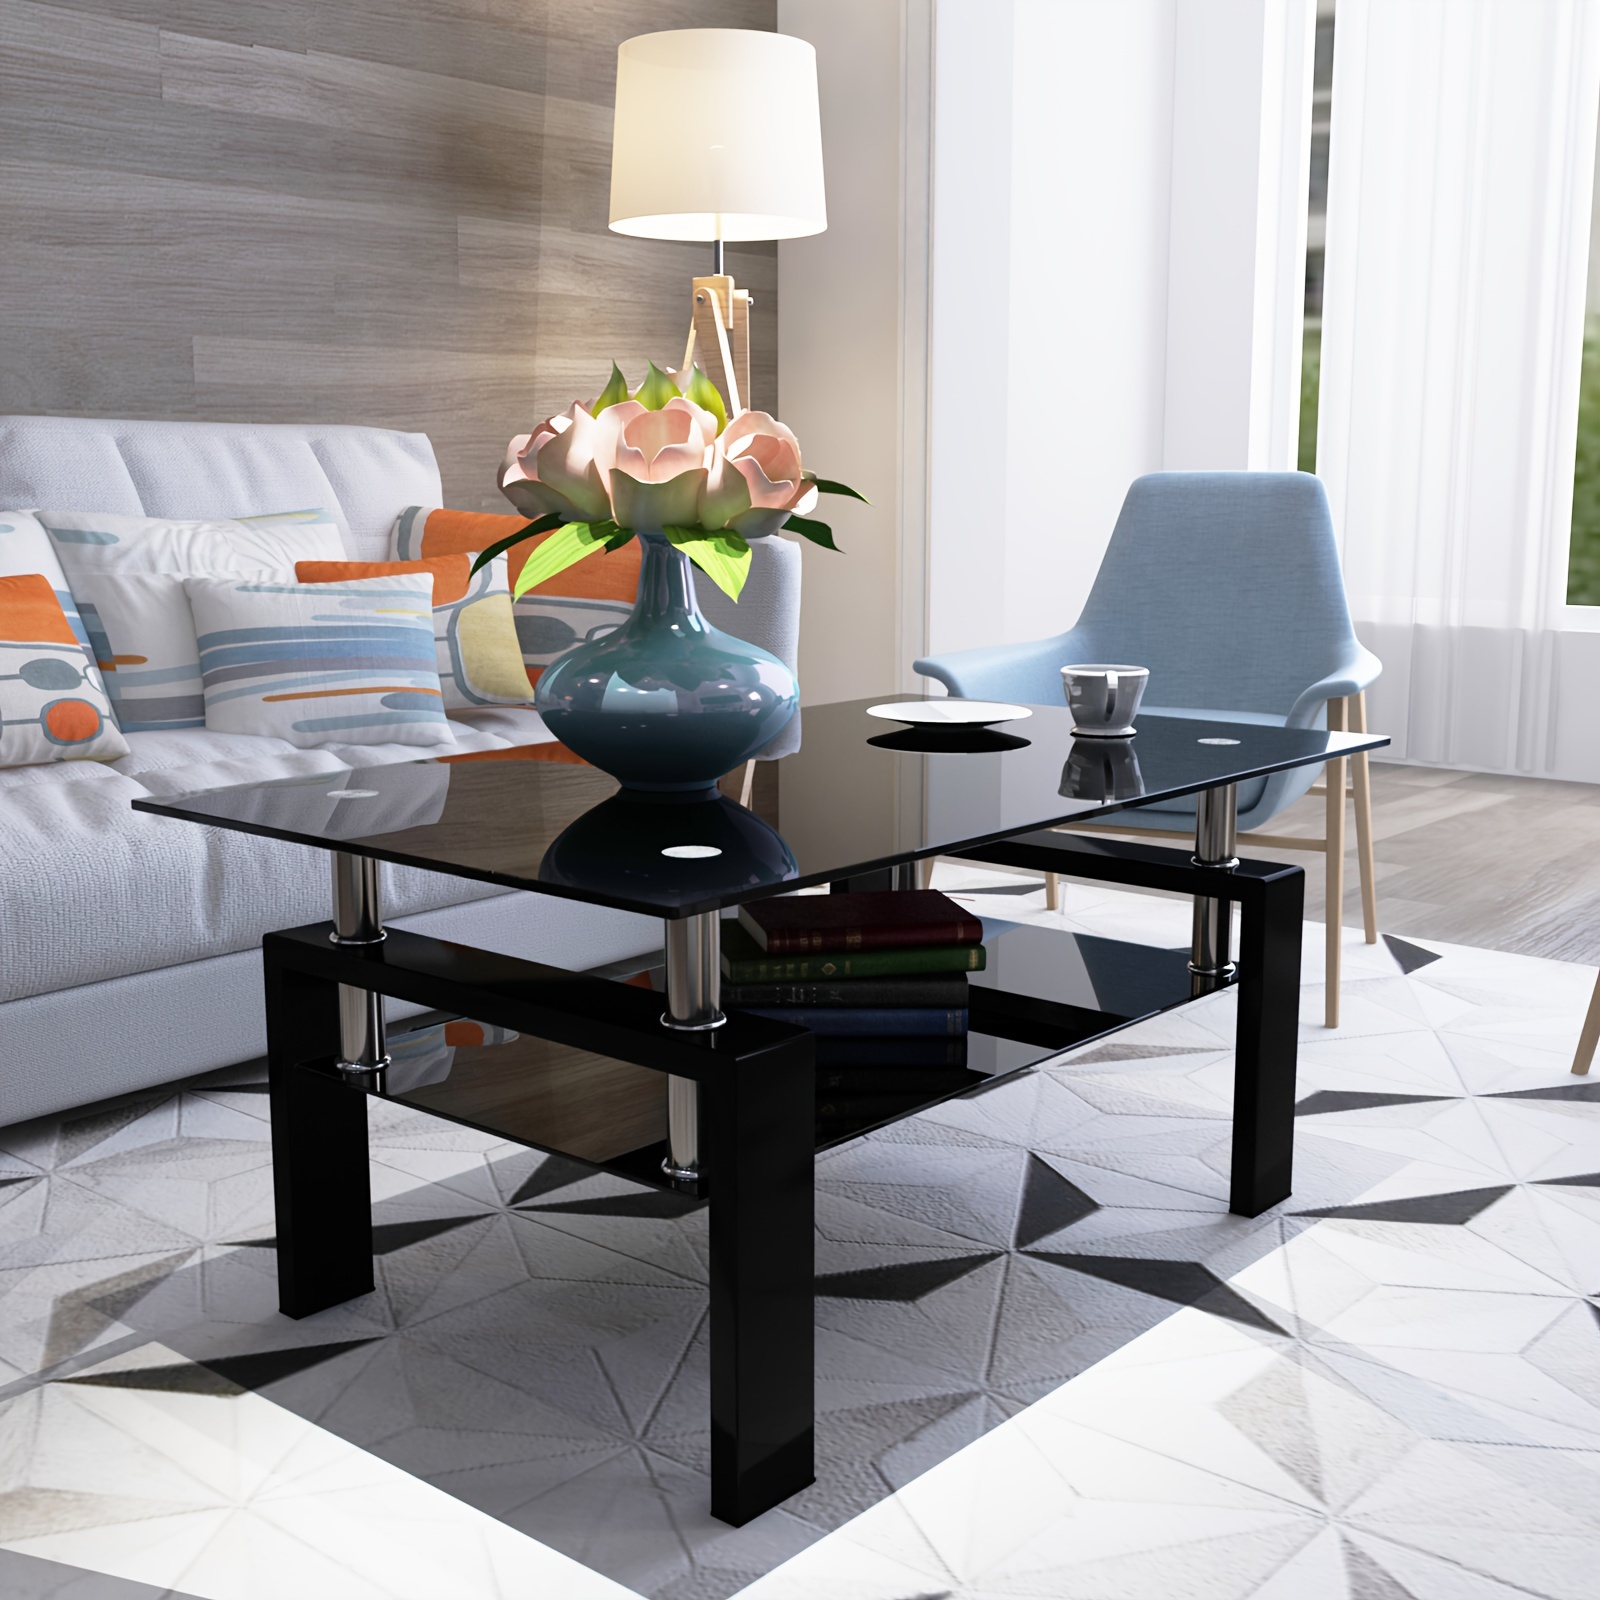 

Rectangle Black Glass Coffee Table, Clear Coffee Table, Modern Side Center Tables For Living Room, Living Room Furniture